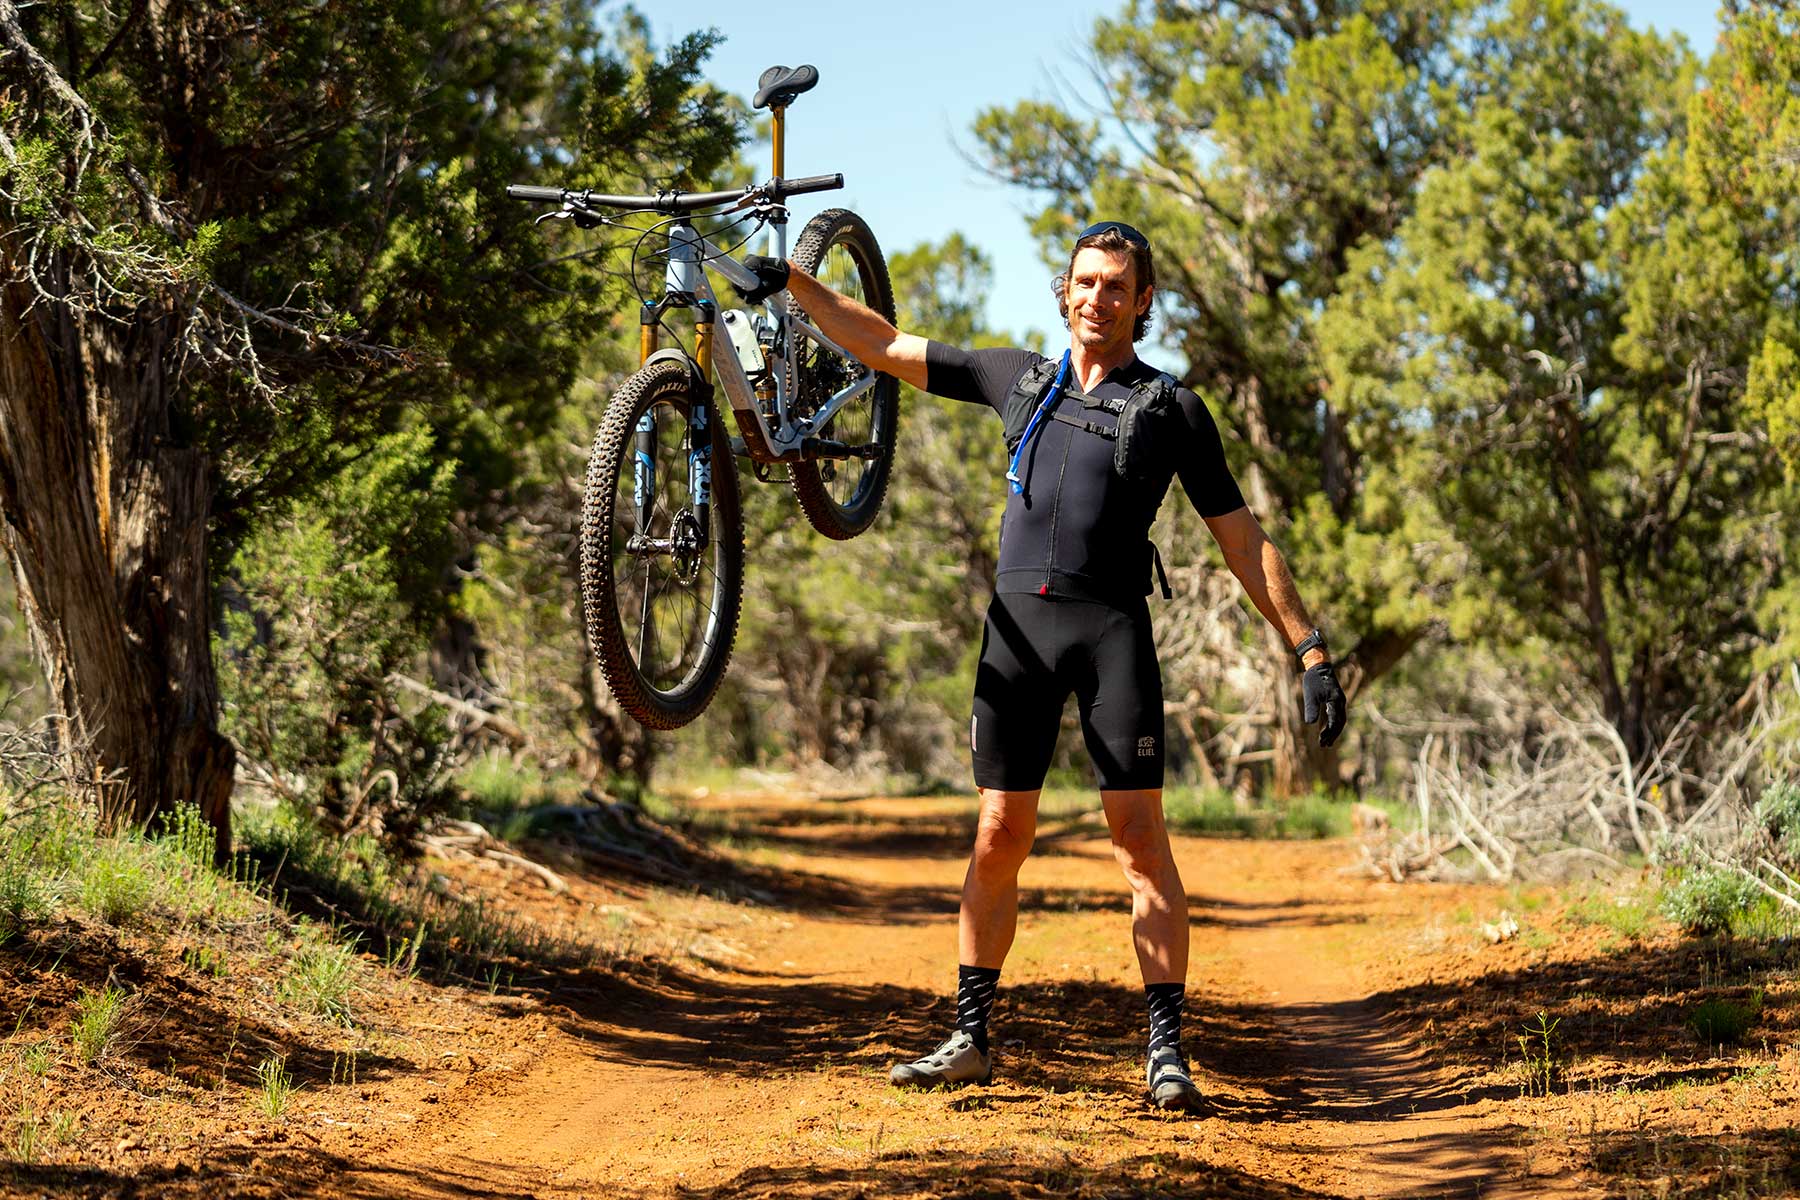 rider holding the pivot mach 4SL xc mountain bike out with one arm